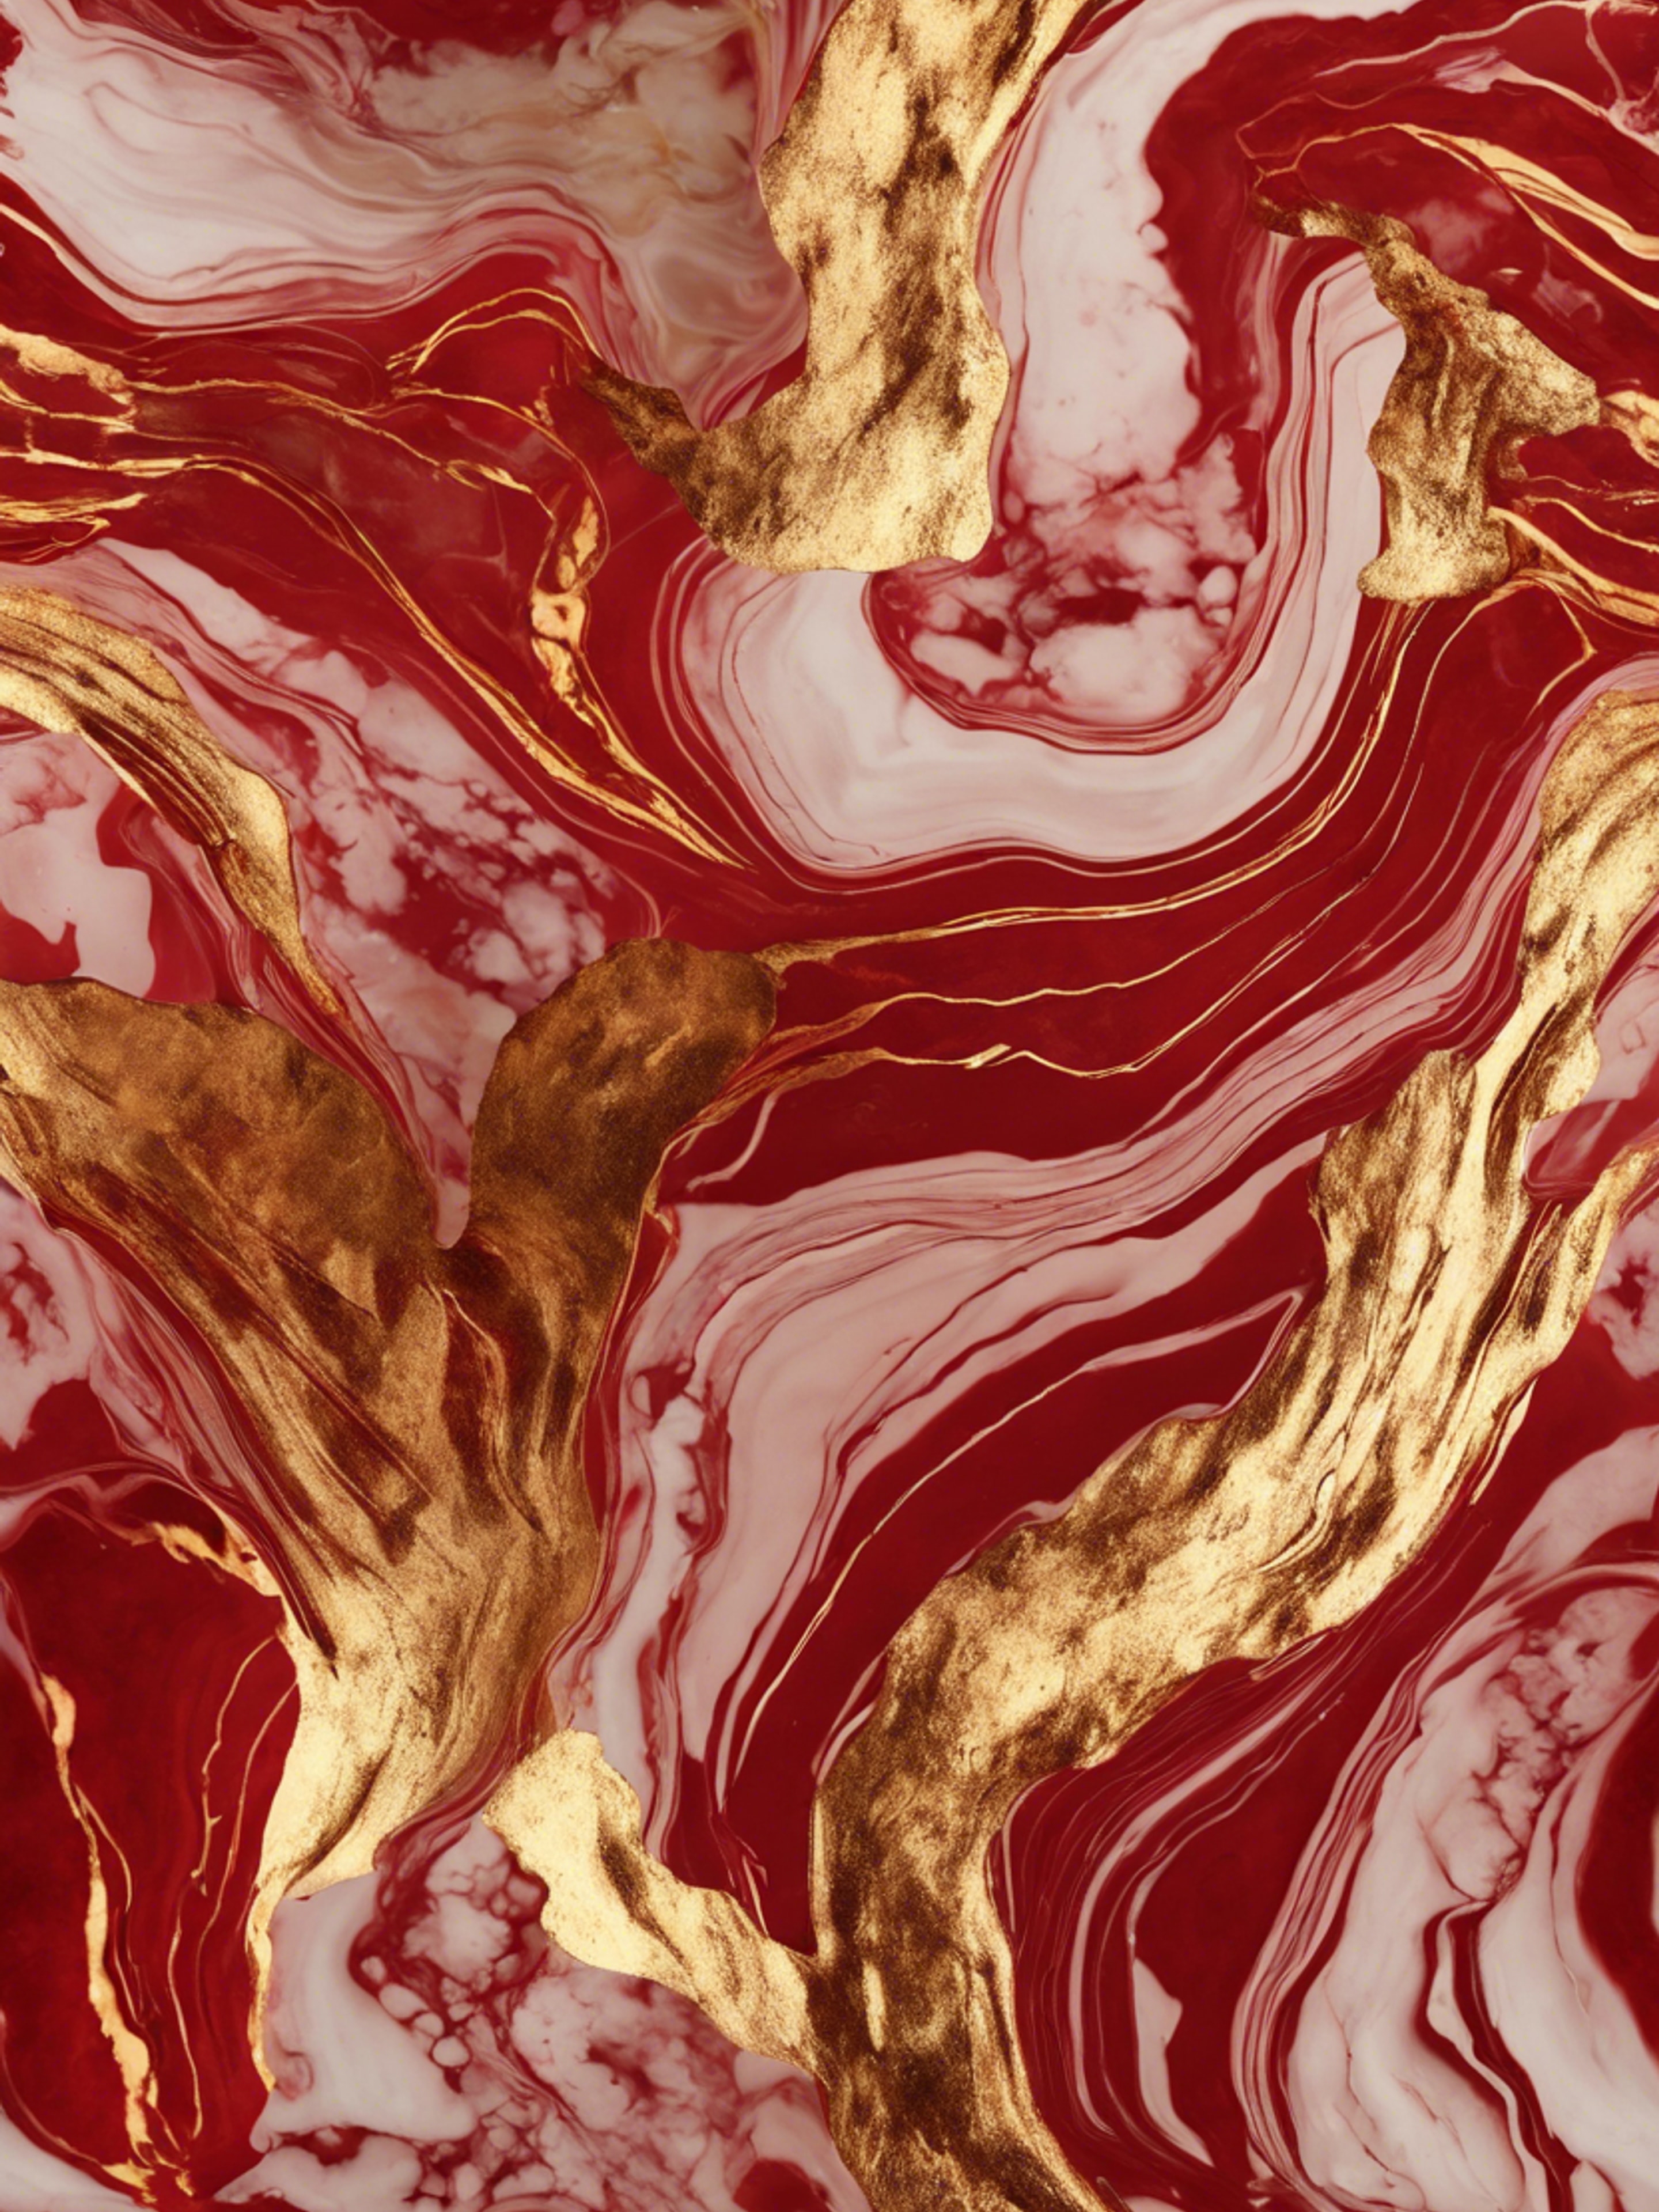 Red marble kissing streaks of gold in a seamless artful pattern.壁紙[a2b30400d94d4f9a9ba8]